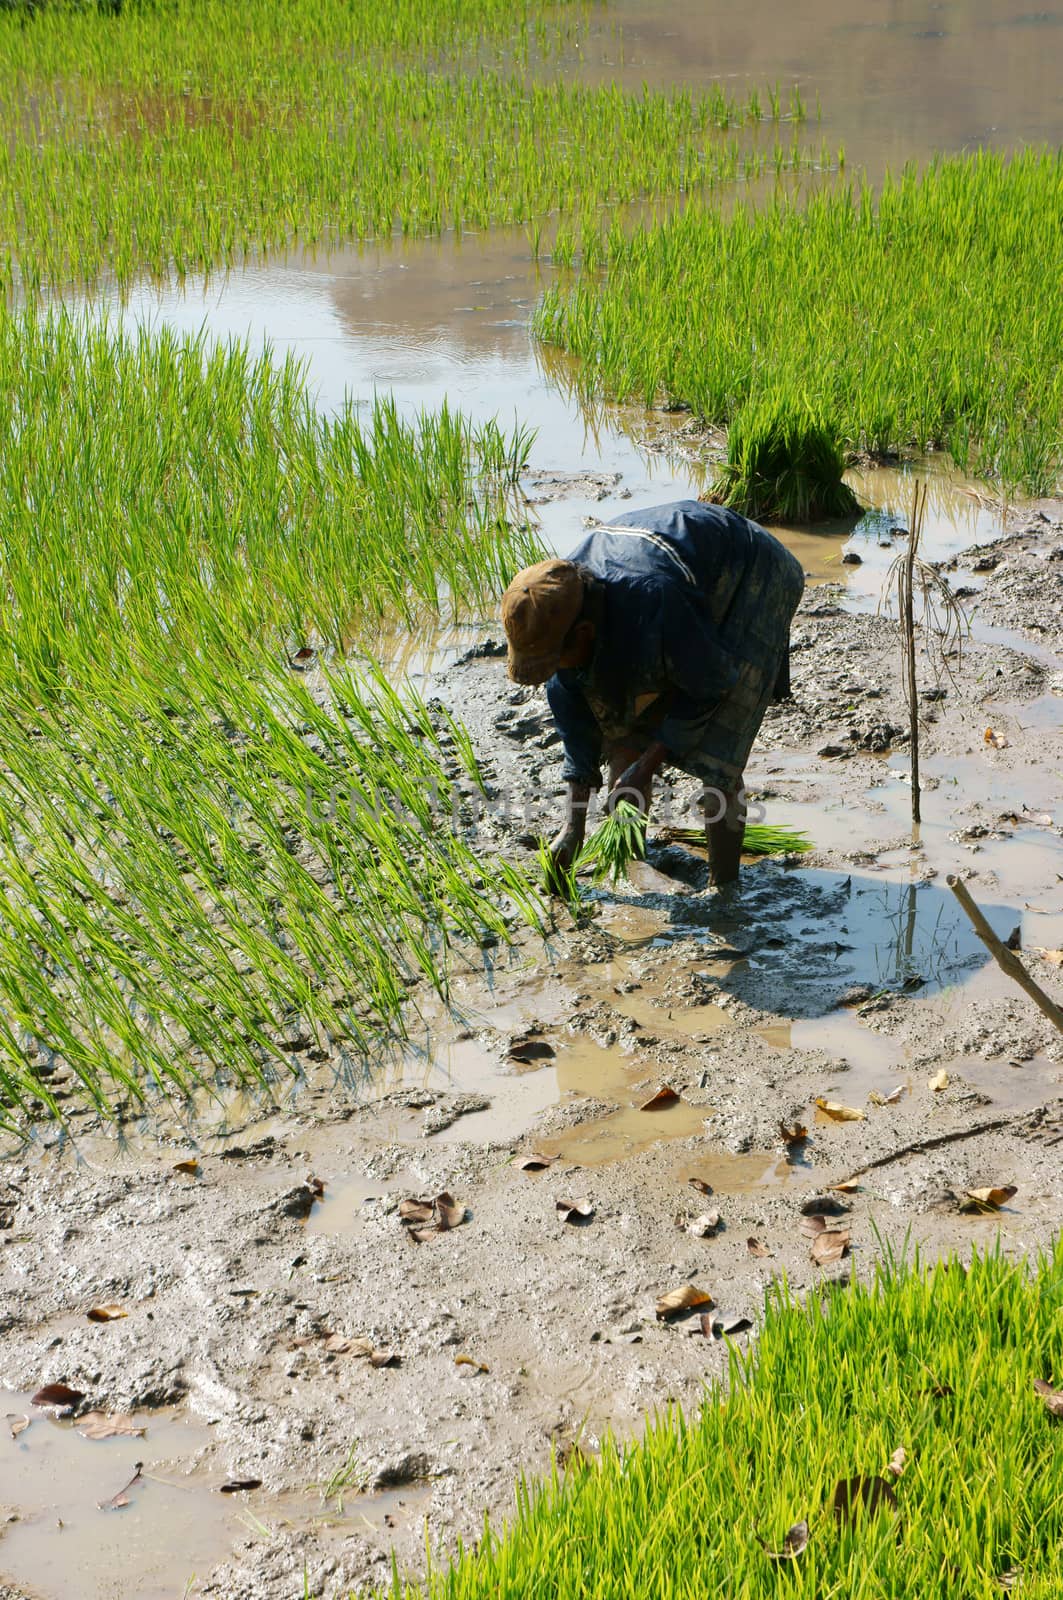 DAKLAK, VIETNAM- FEB 7: Farmer sow rice on paddy field, he transplant rice seeding on muddy plantation for springtime crop of agricultural country in Viet Nam, Feb 7, 2014                           